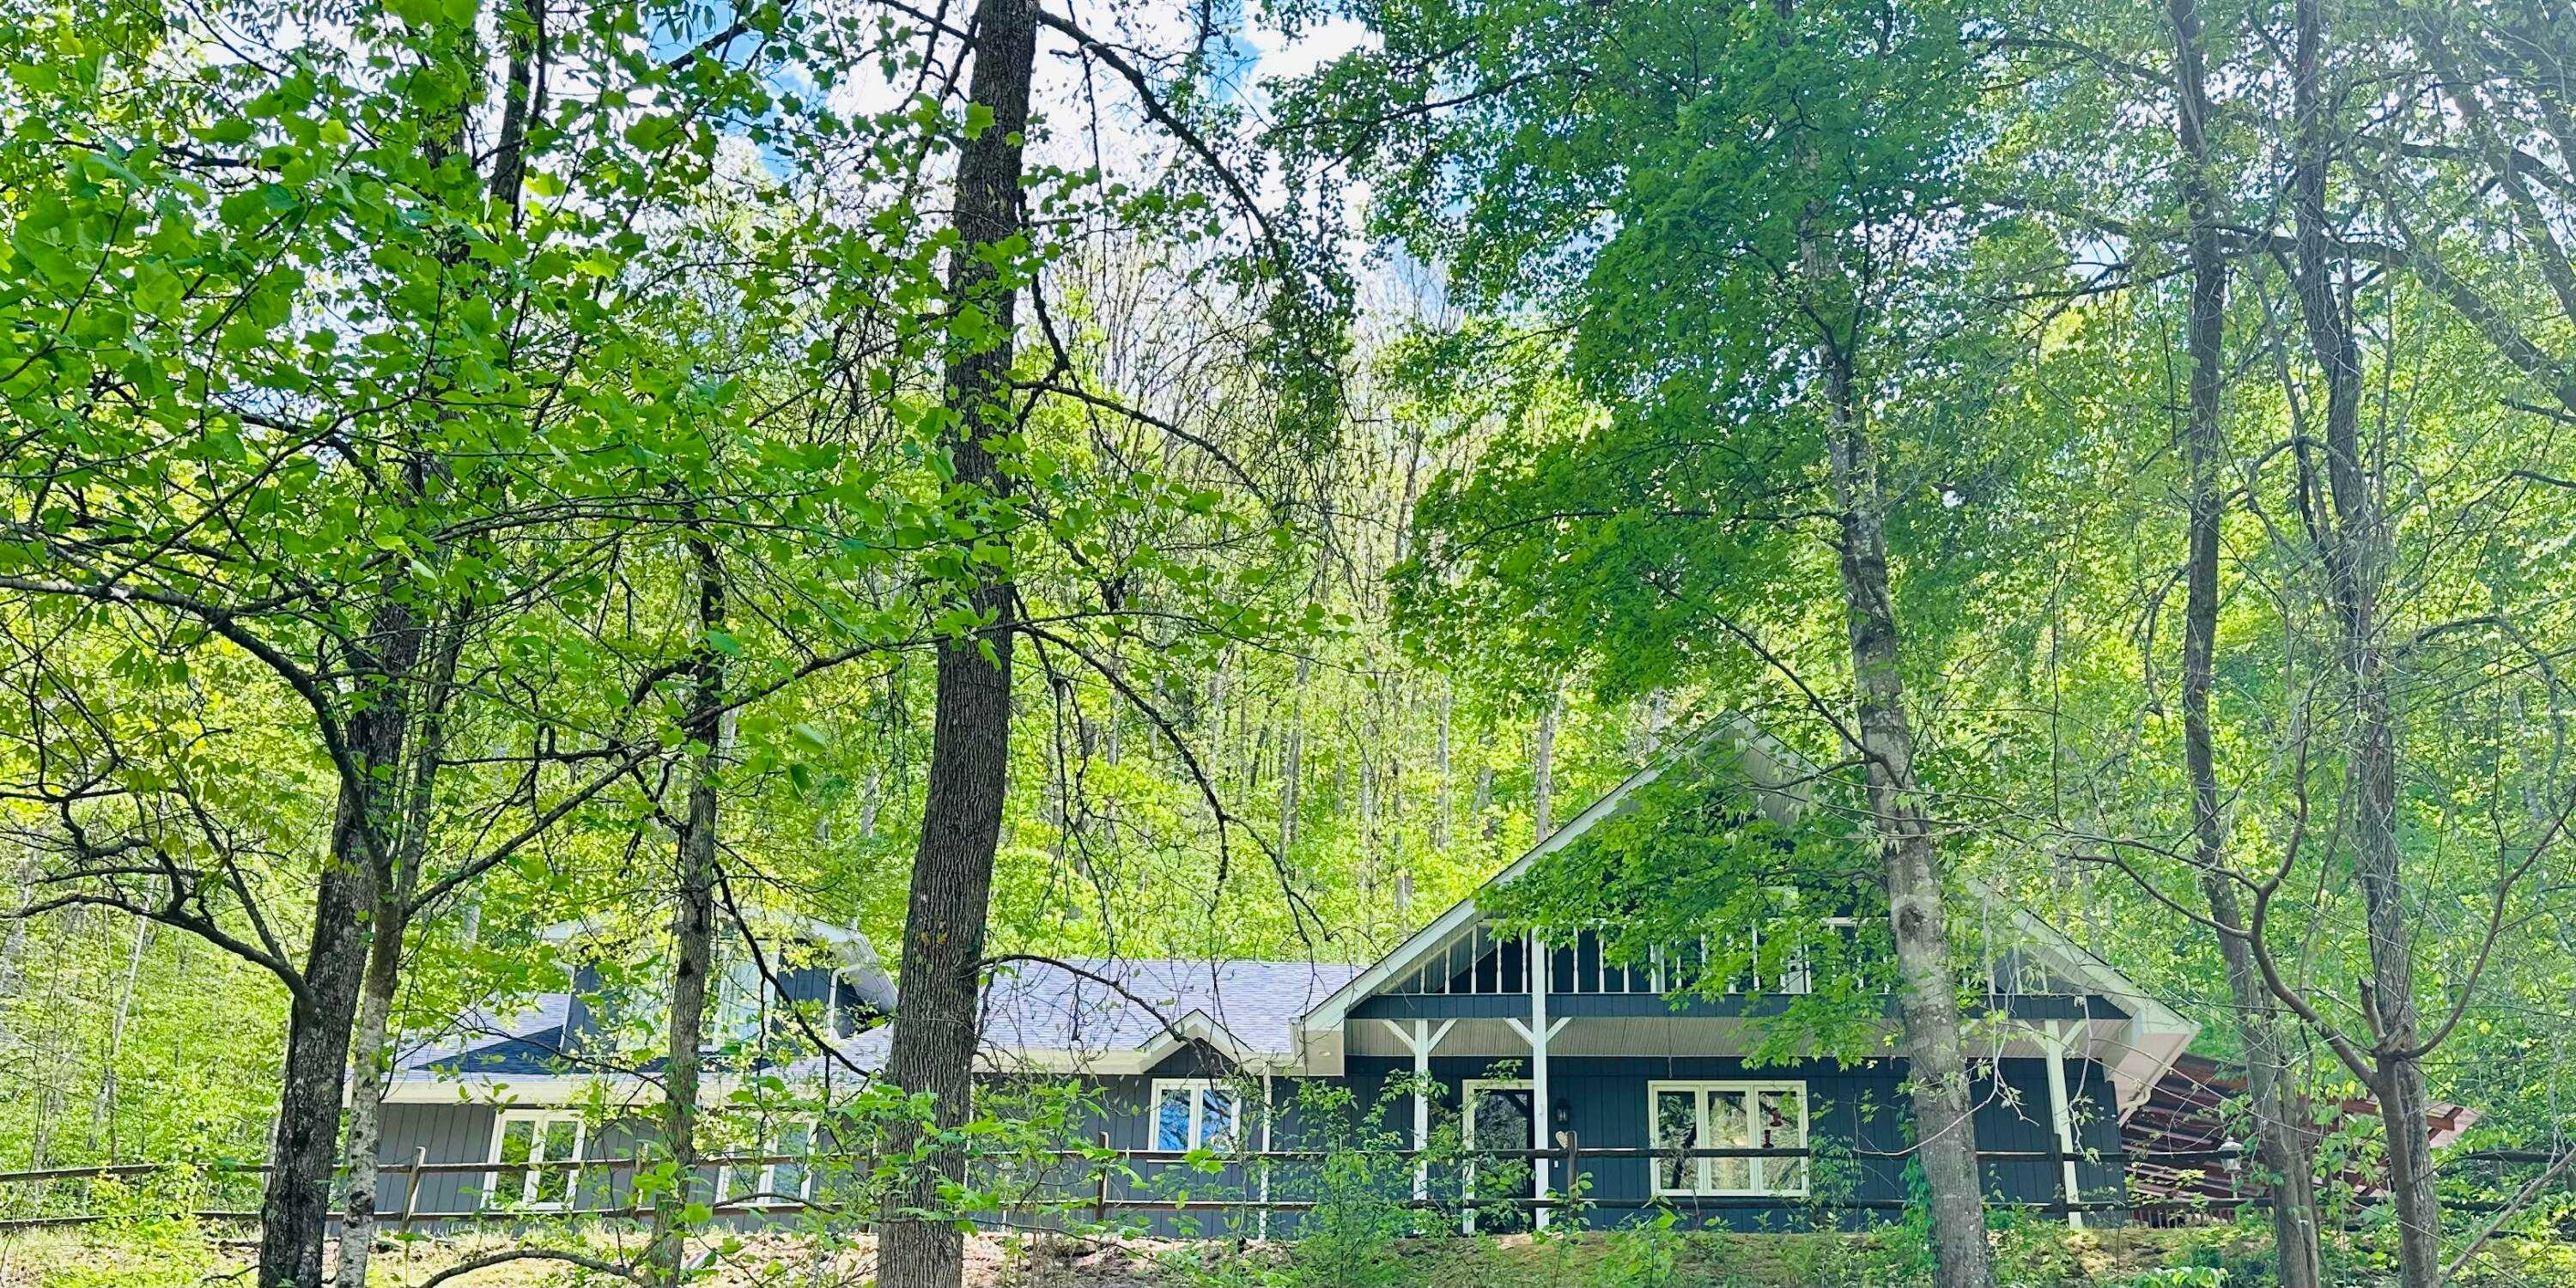 243 Rockhouse Branch, 23007514, Manchester, Single Family Residence,  for sale, KY Real Estate Professionals LLC